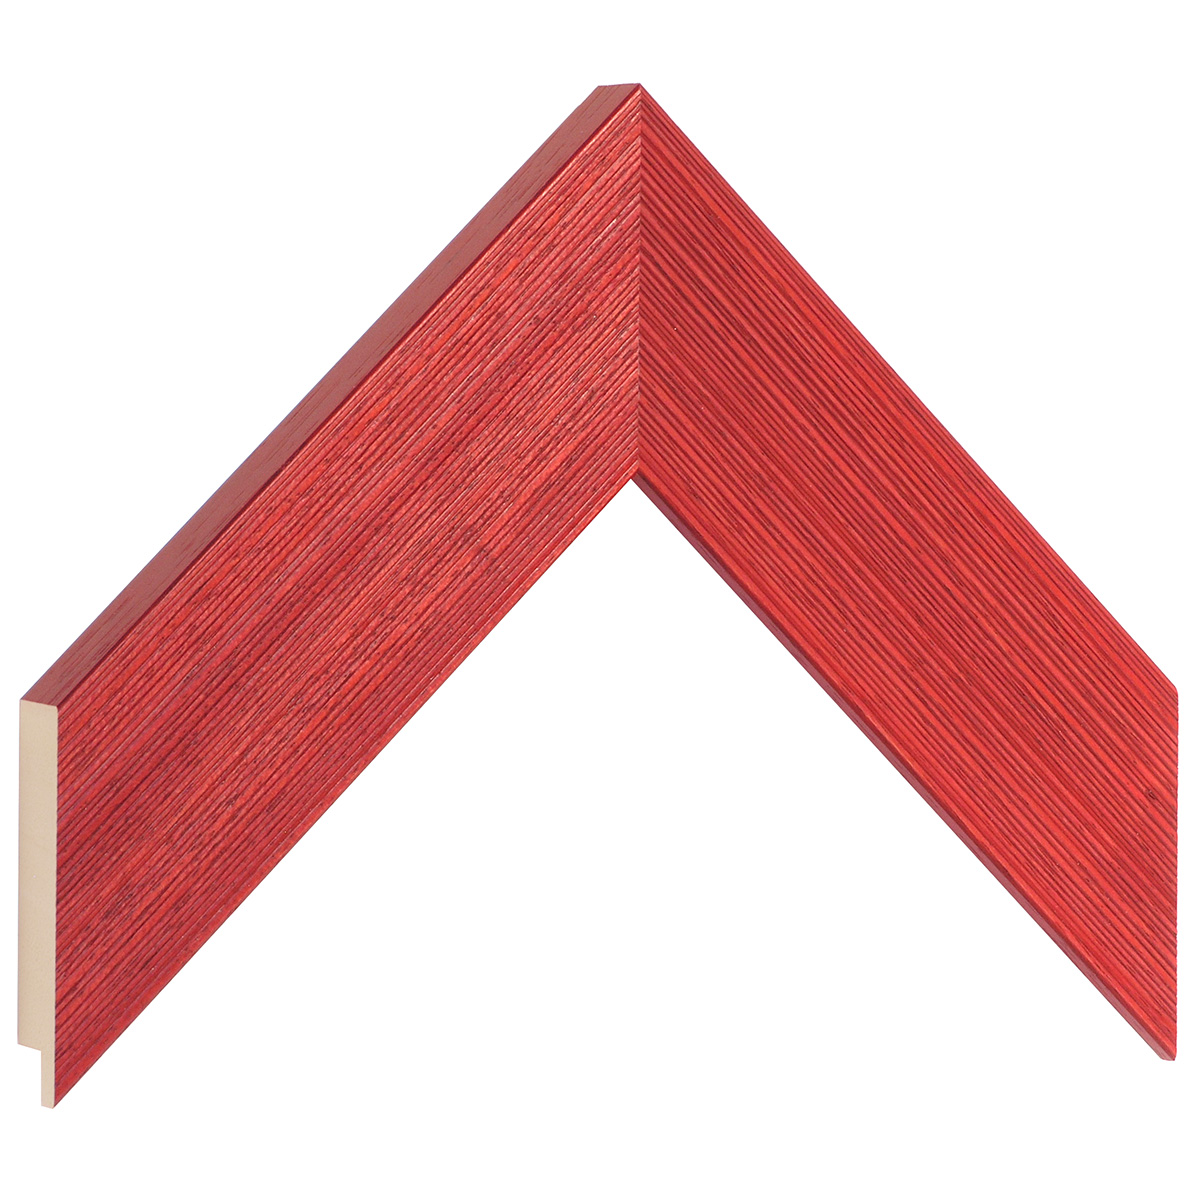 Moulding ayous, width 48mm height 20 - streaked red finish - Sample